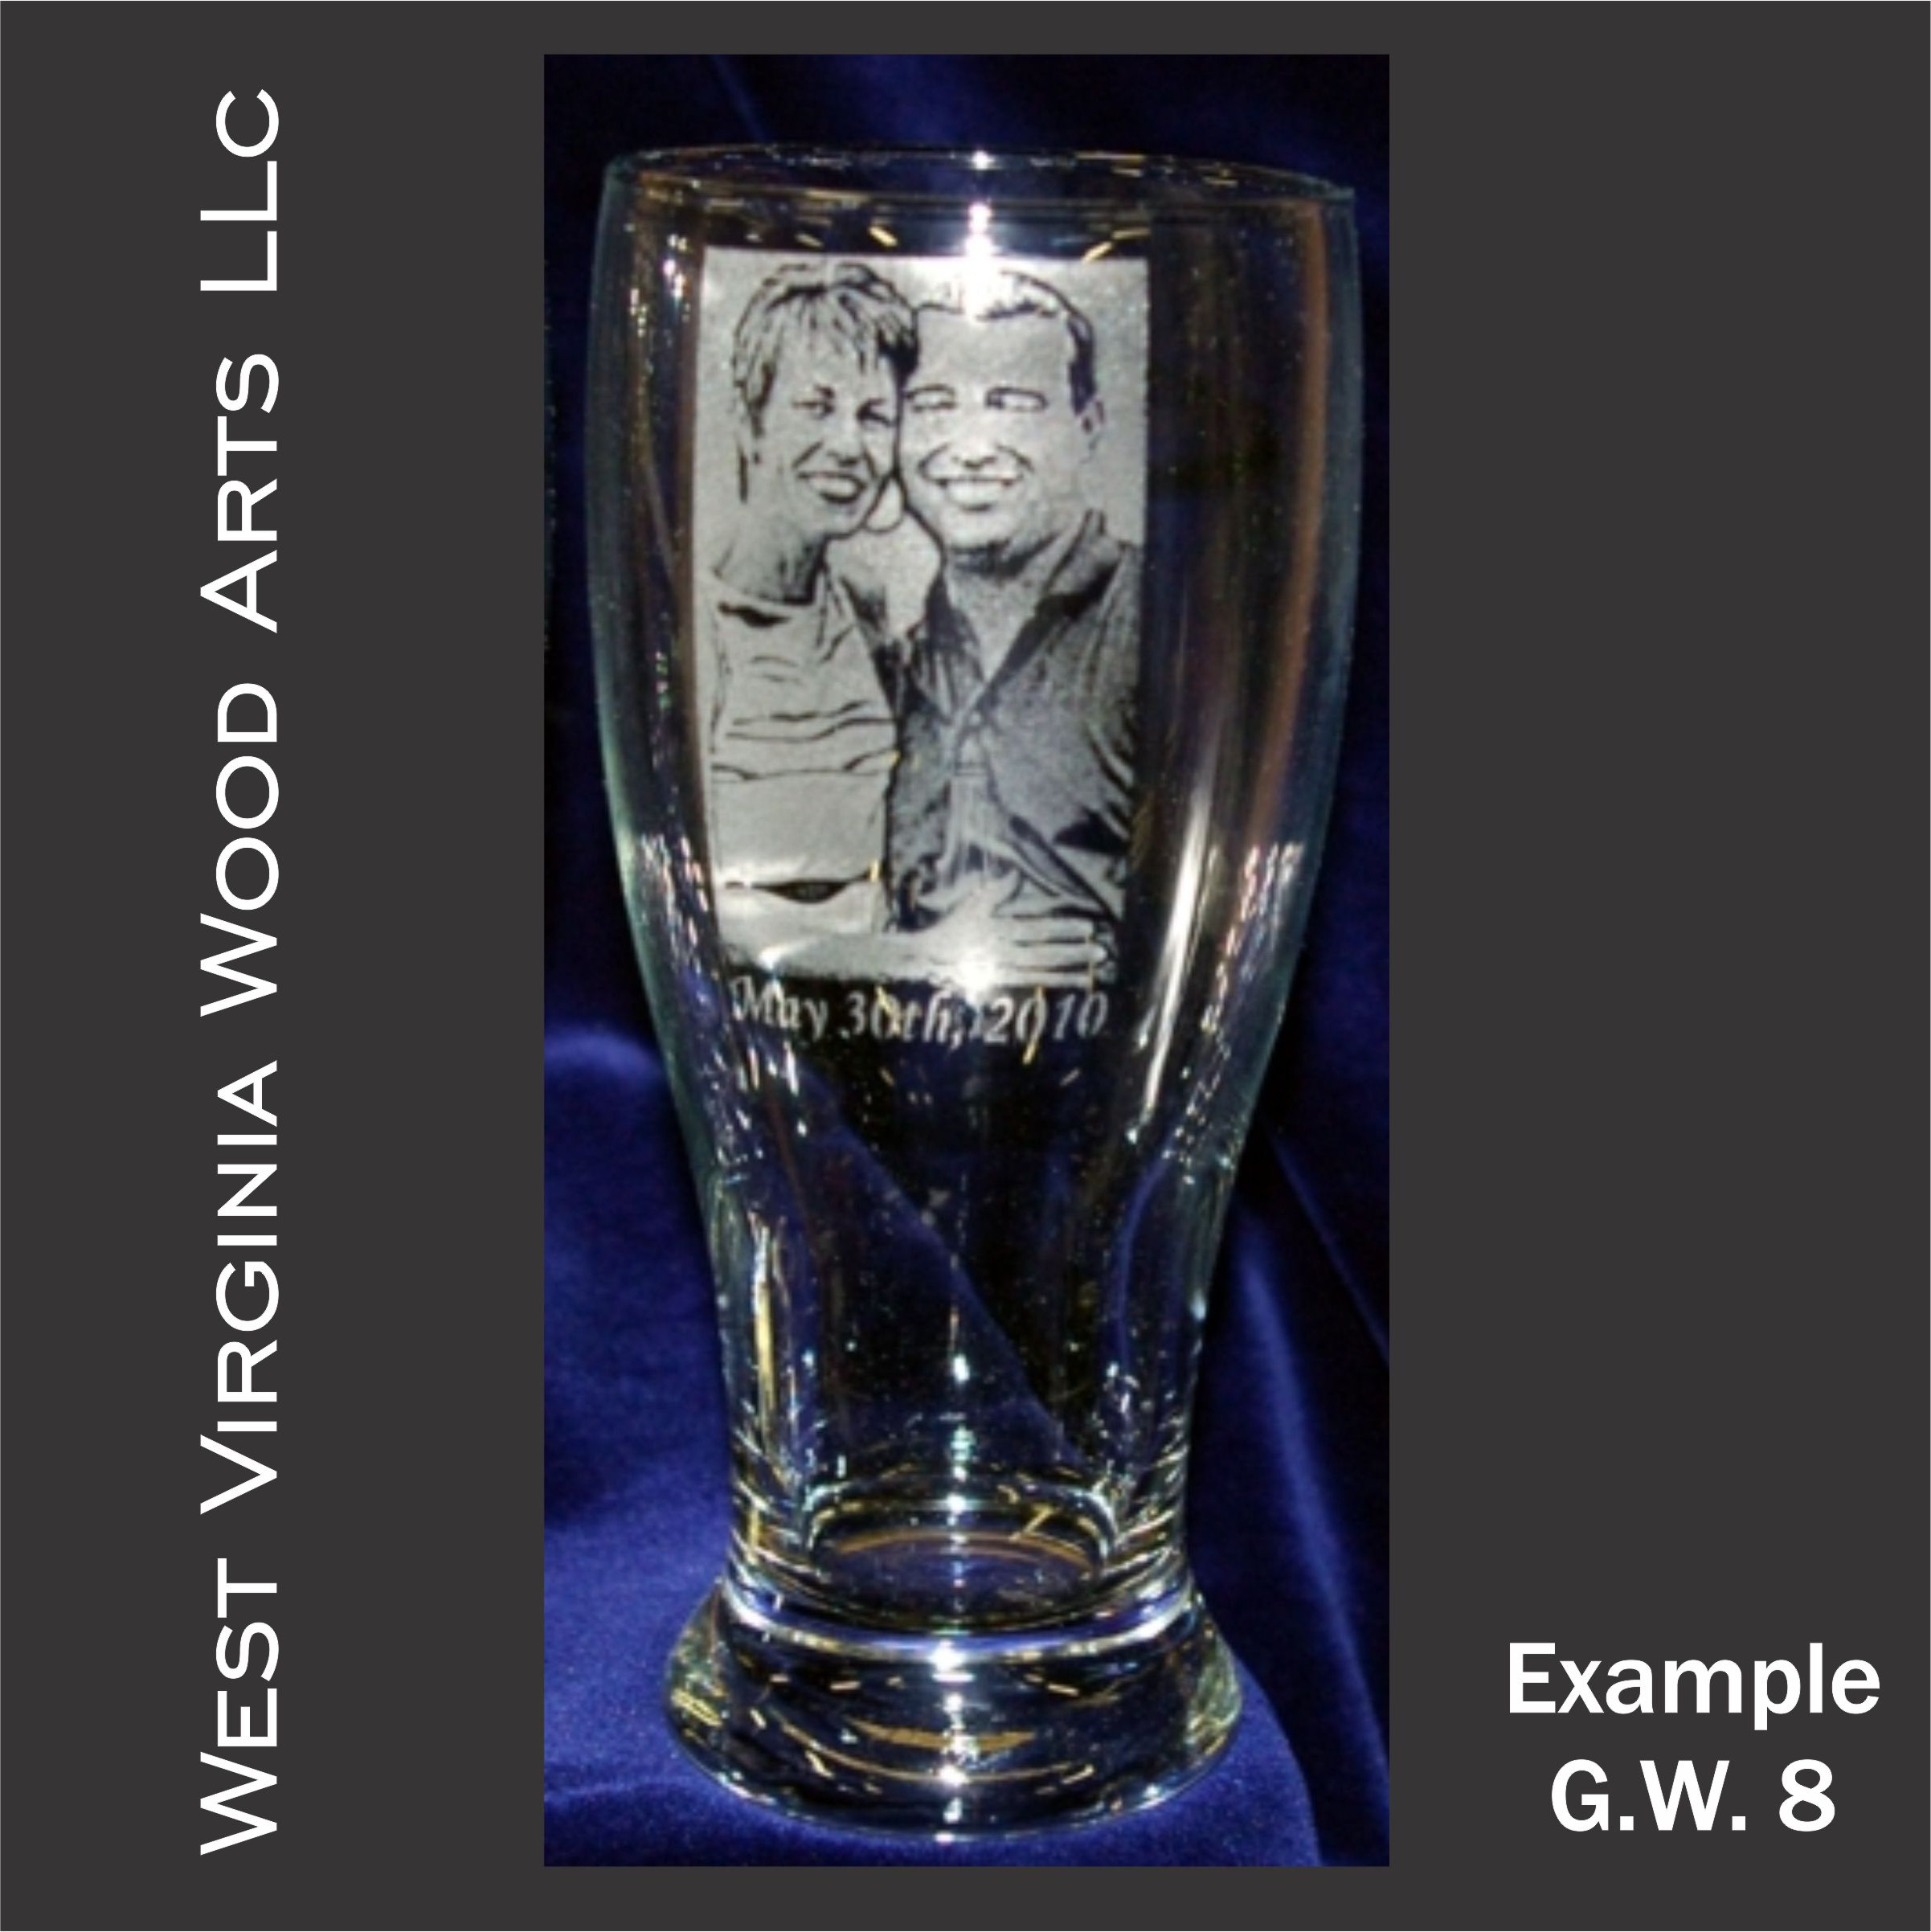 Personalized glassware main example with photo engraving